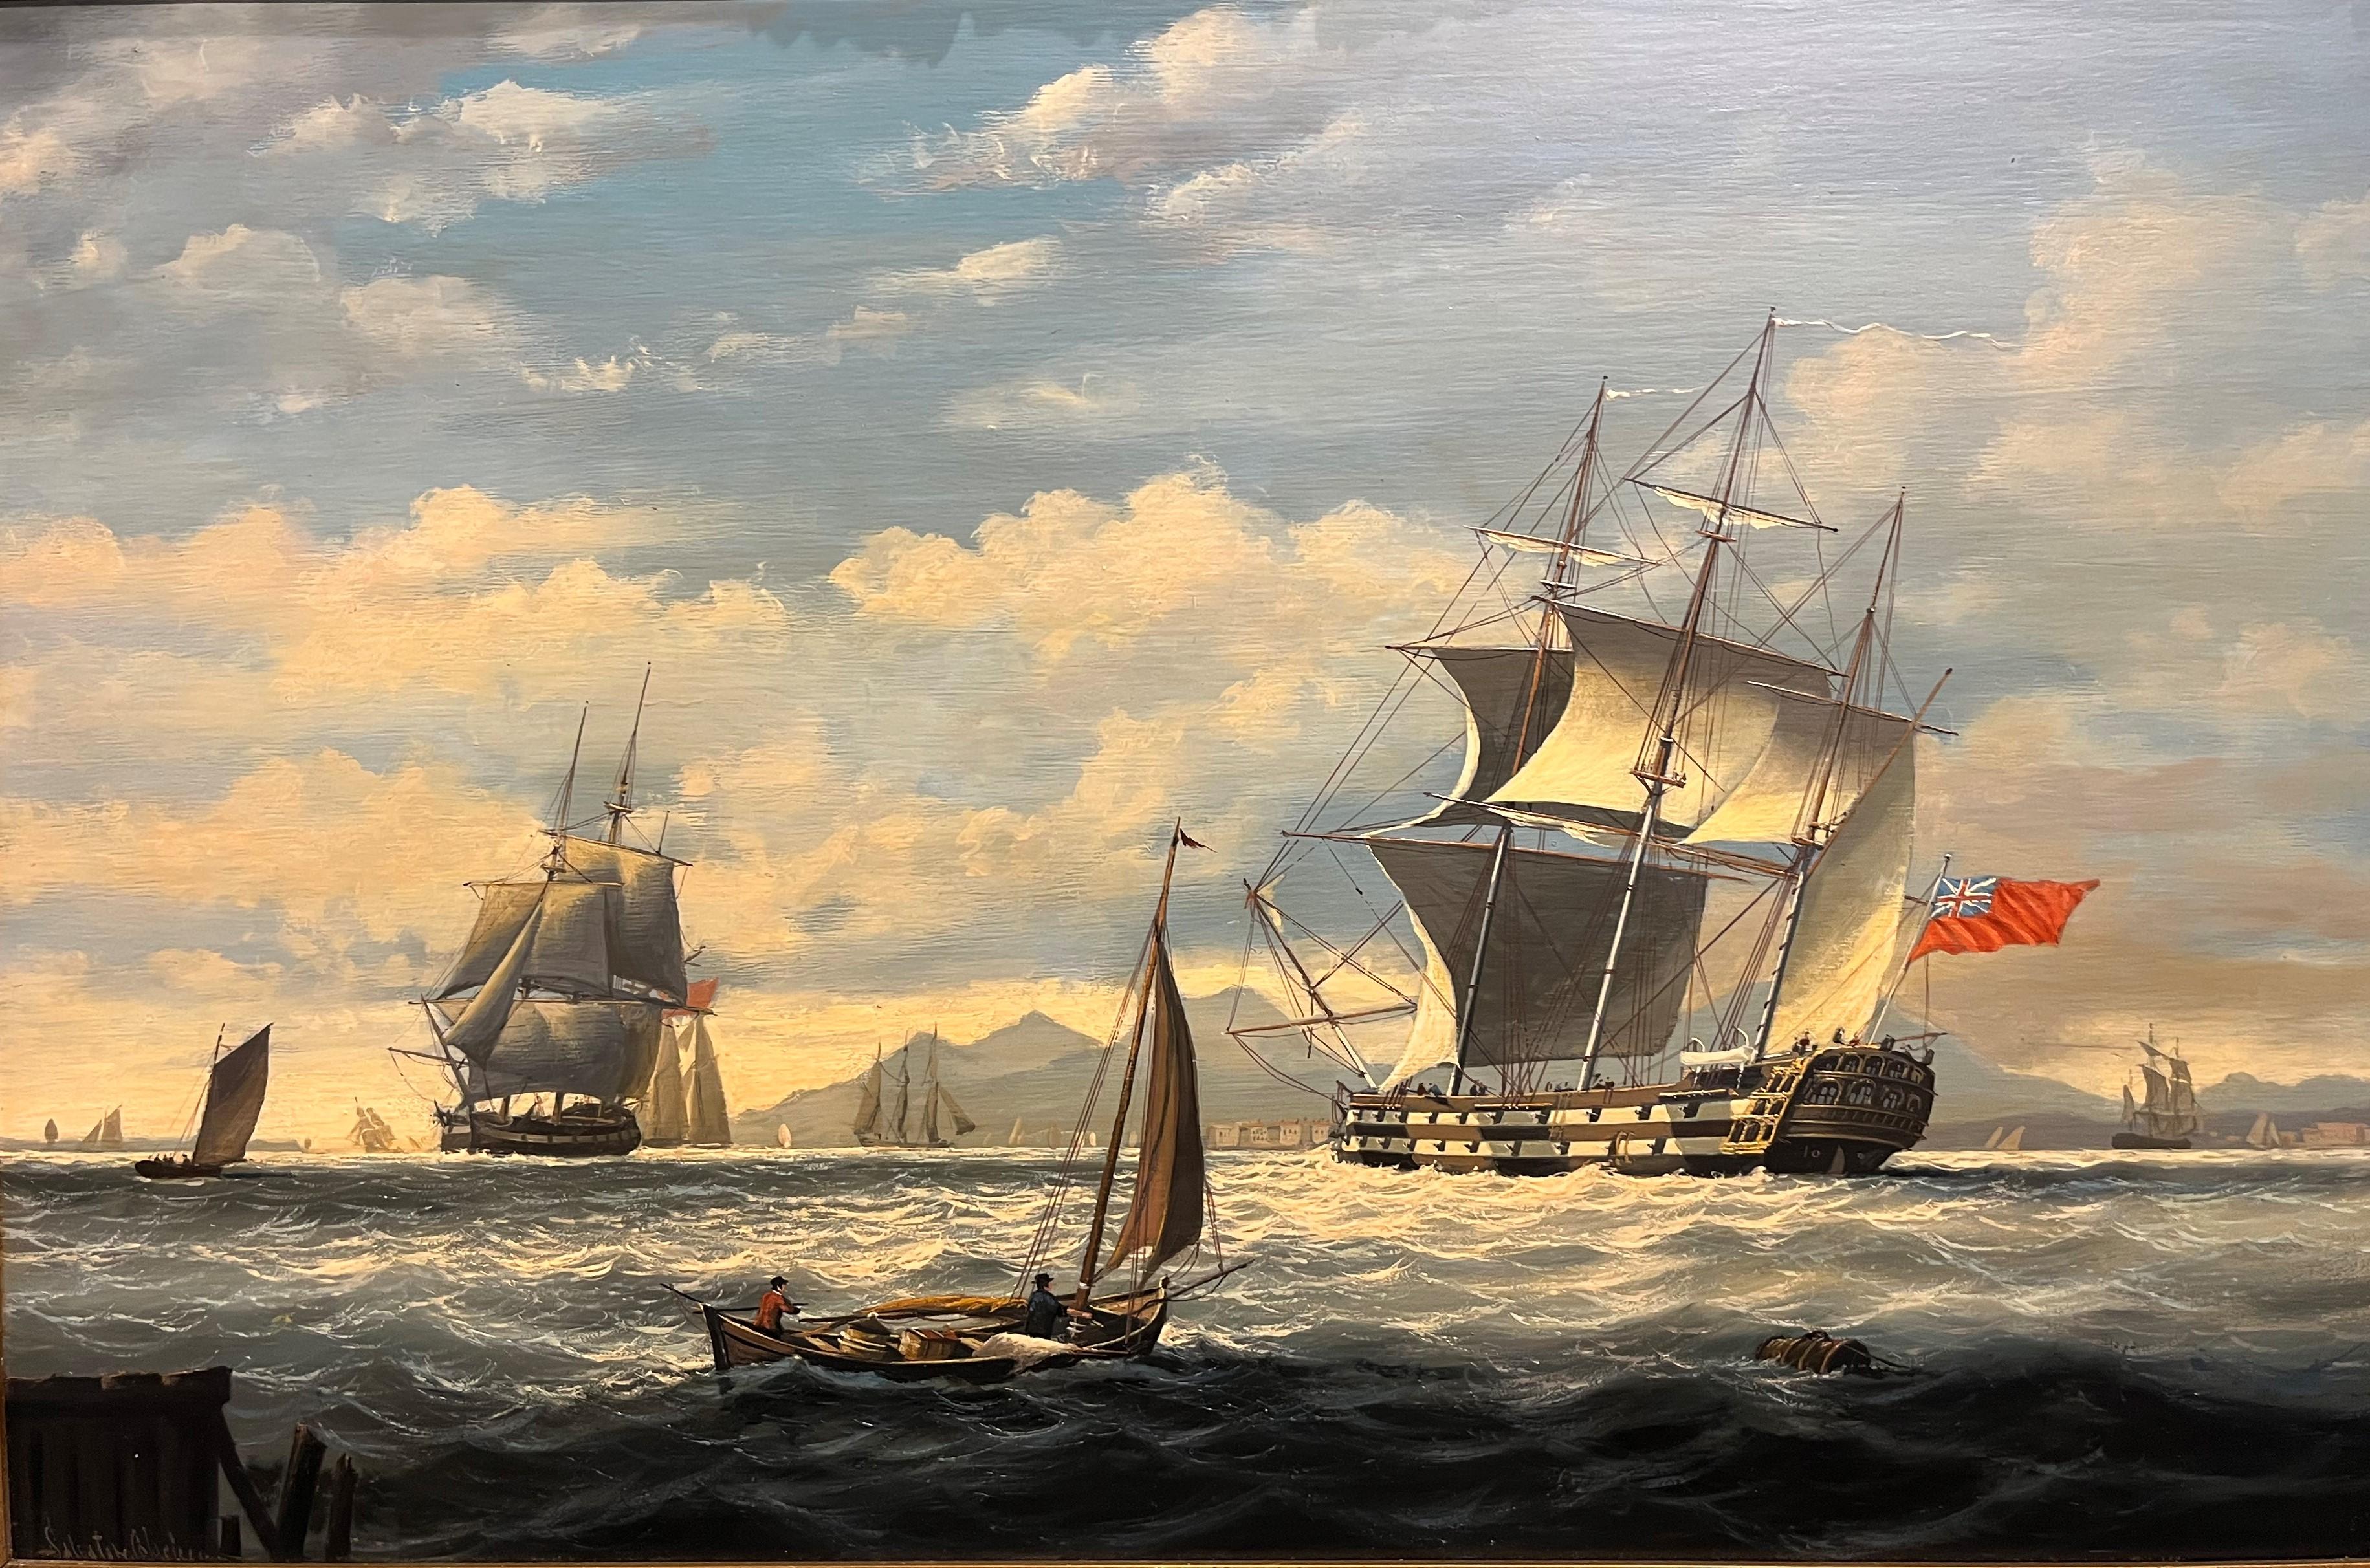 LARGE OIL PAINTING by SALVATORE COLACICCO (NAVY ADMIRALTY 20th CENTURY PIECE  - Realist Painting by Salvatore Colacicco